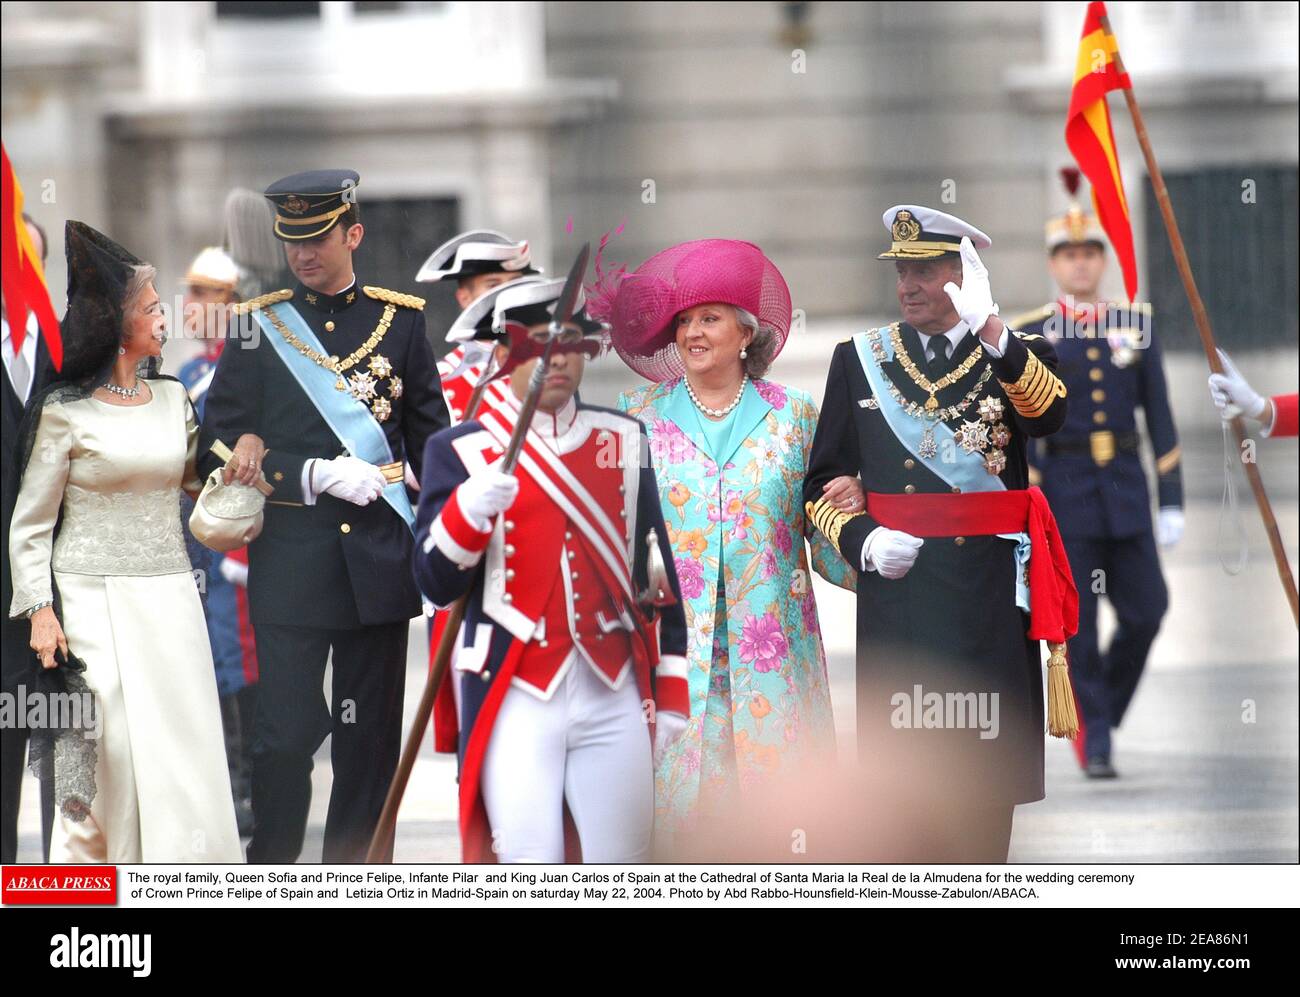 The royal family, Queen Sofia and Prince Felipe, Infante Pilar and King Juan Carlos of Spain at the Cathedral of Santa Maria la Real de la Almudena for the wedding ceremony of Crown Prince Felipe of Spain and Letizia Ortiz in Madrid-Spain on saturday May 22, 2004. Photo by Abd Rabbo-Hounsfield-Klein-Mousse-Zabulon/ABACA. Stock Photo